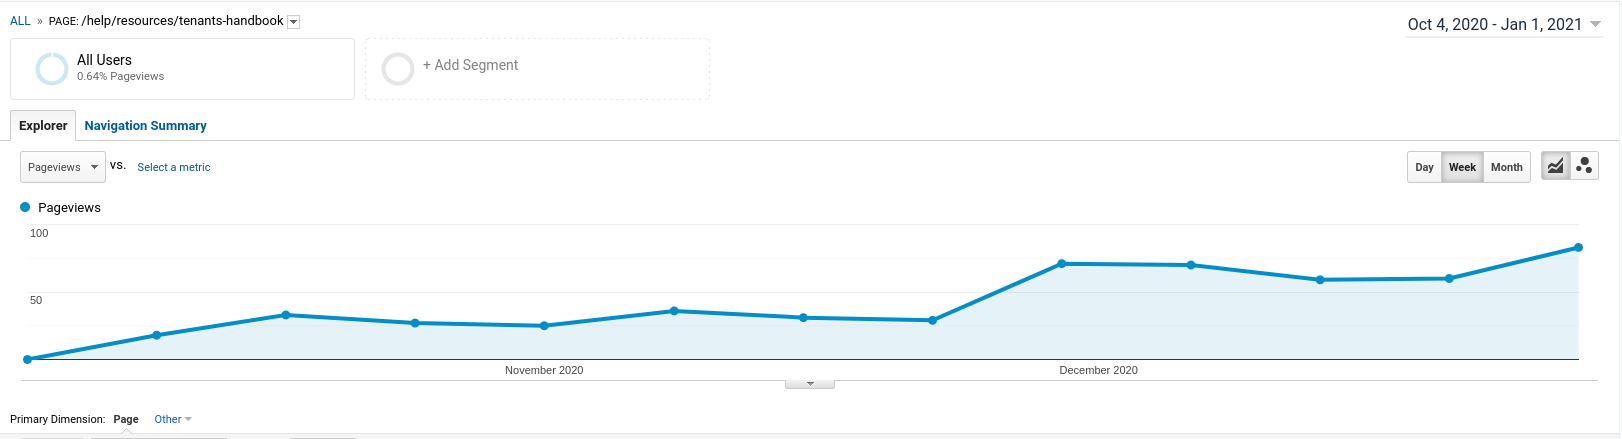 Google Analytics line graph showing a steady increase in pageviews from October 4th 2020 through December 2020.